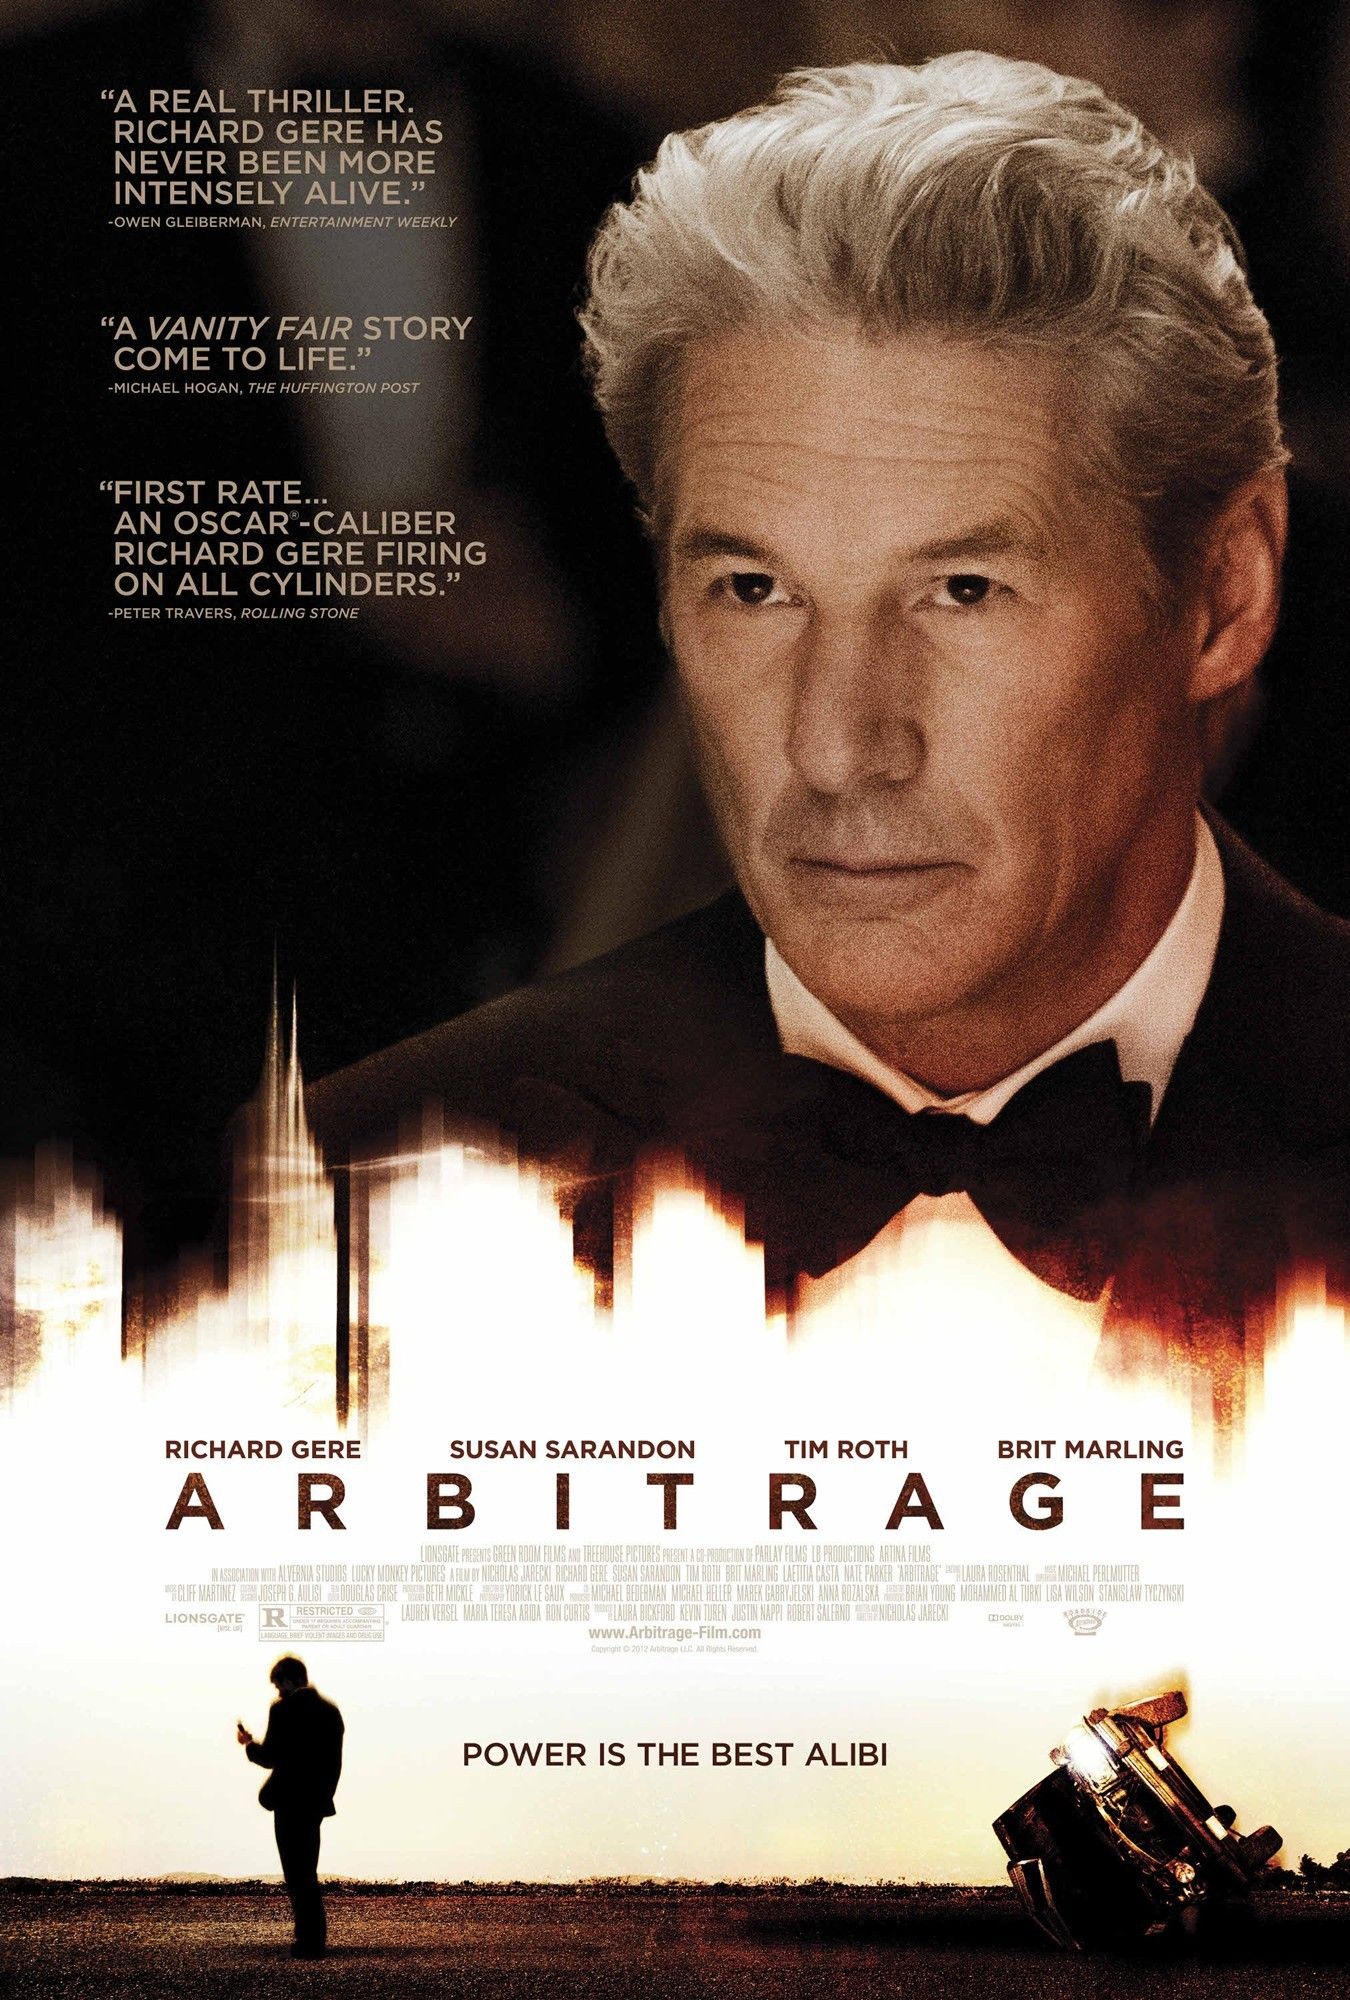 Poster of Roadside Attractions' Arbitrage (2012)